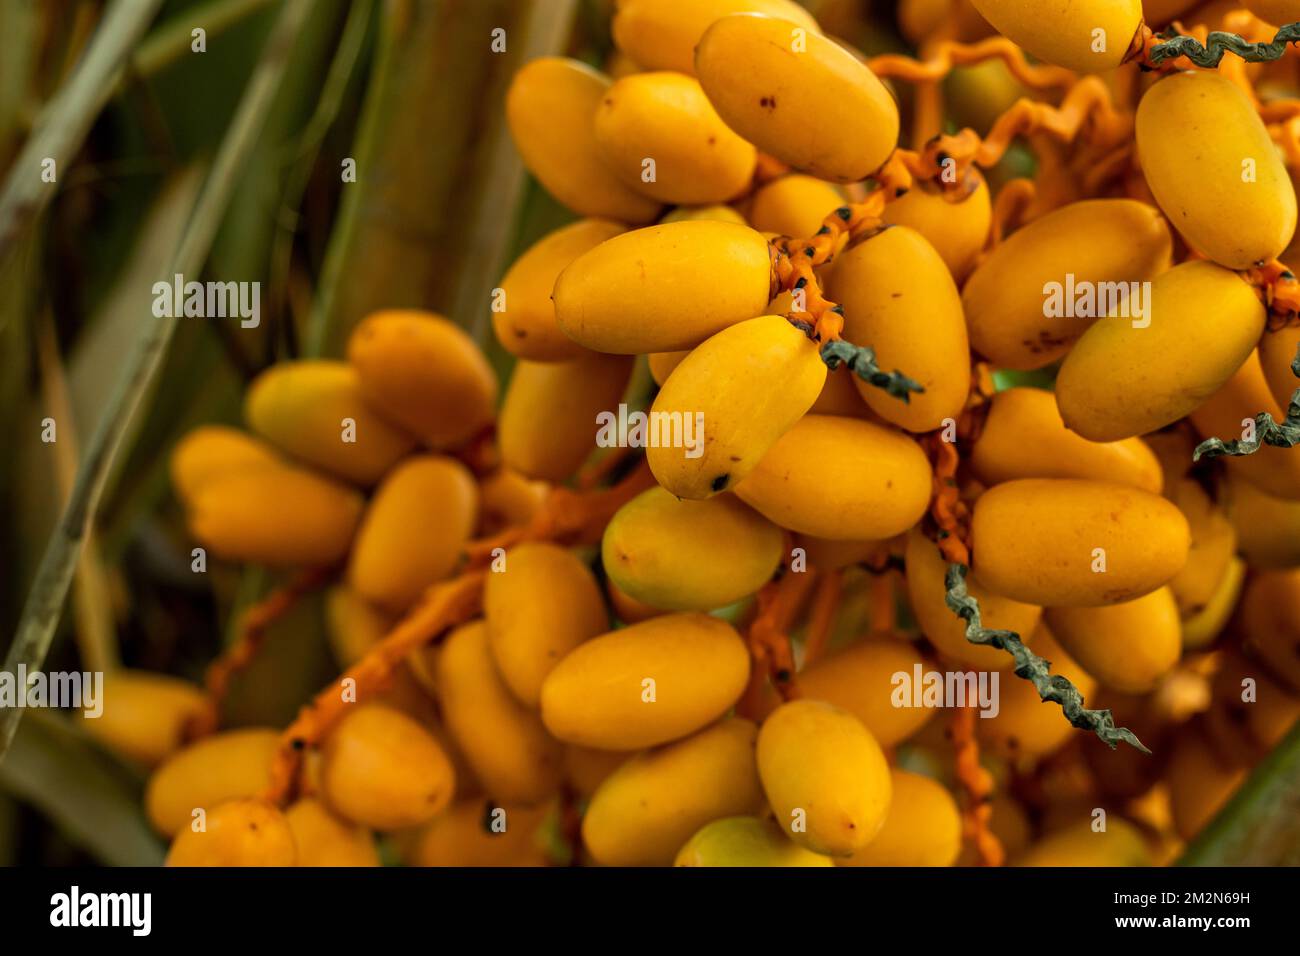 Fresh dates are delicious and eaten just as they are, with a cup of coffee or mug of tea alongside to cut the sweetness. The date is a mainstay of the Stock Photo